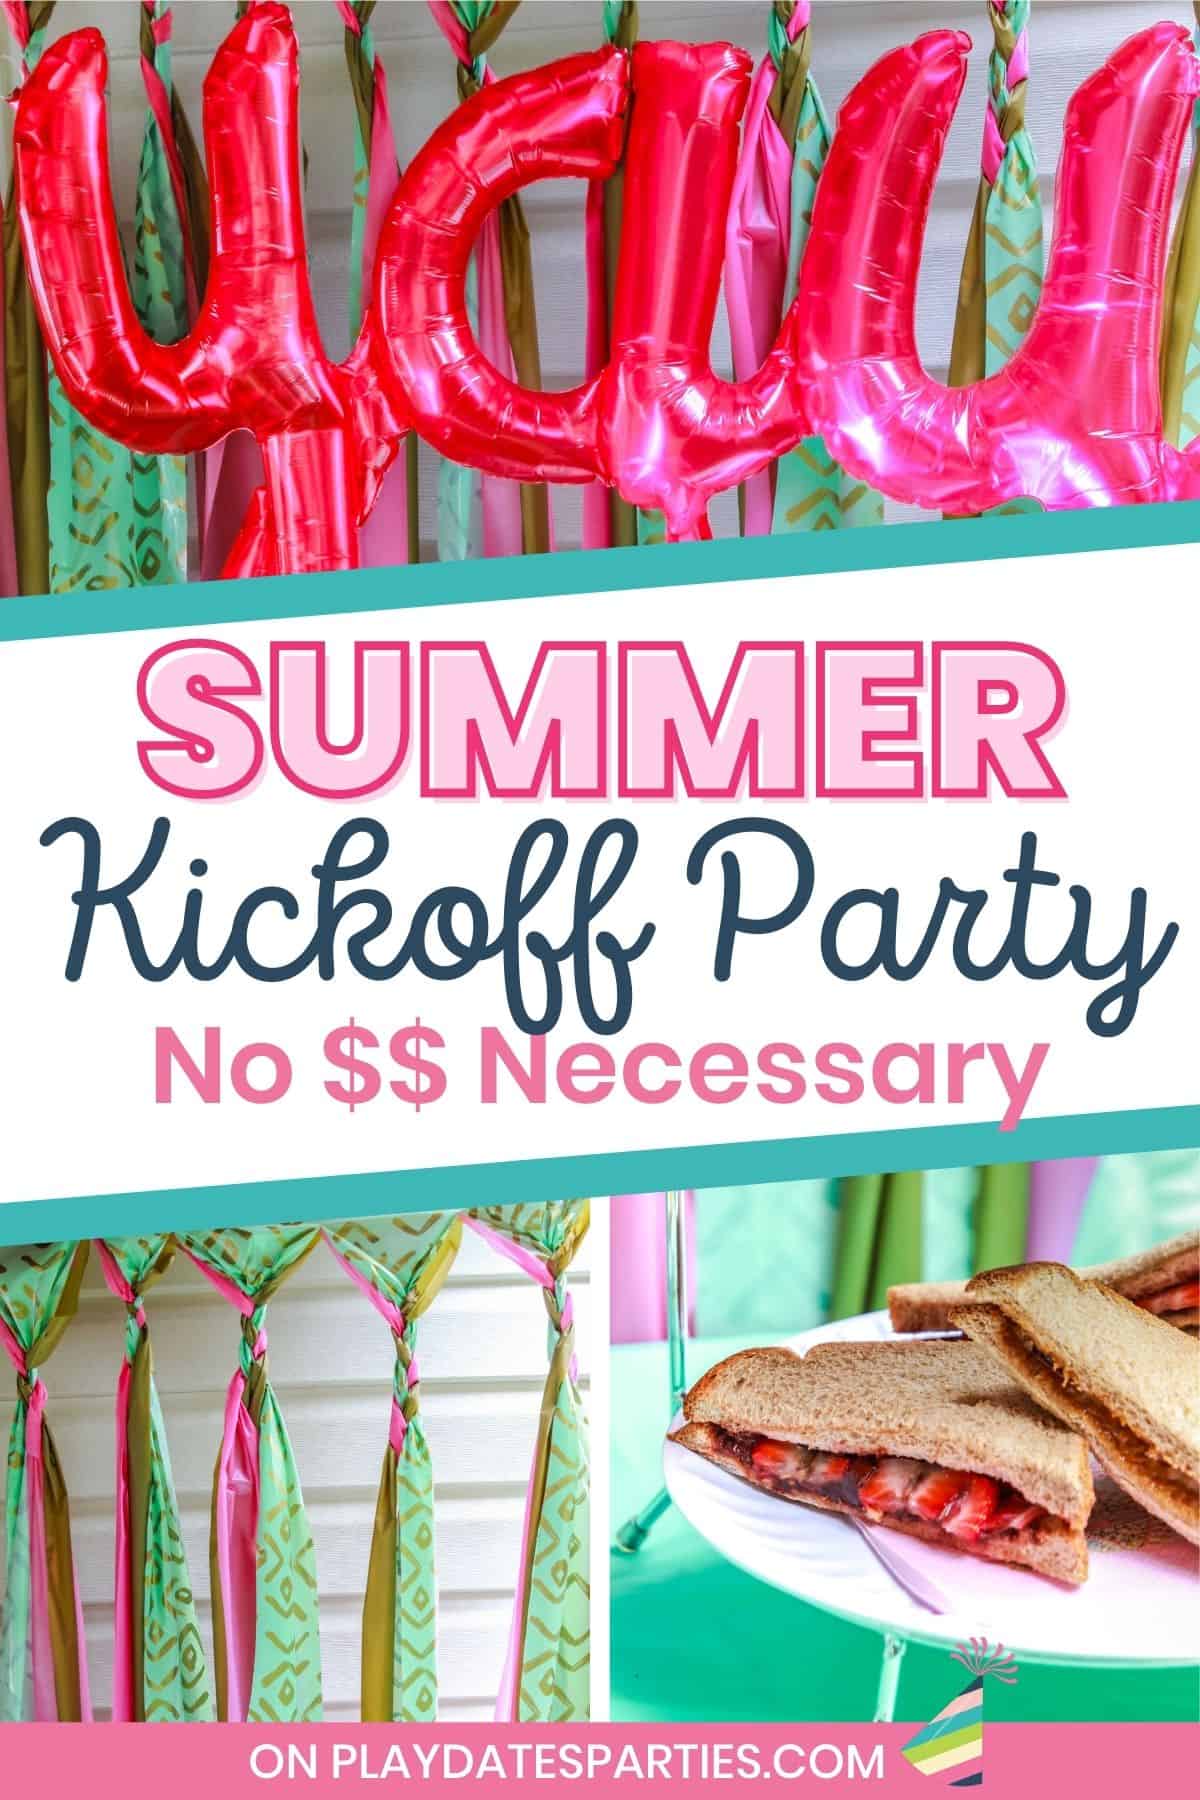 collage of party decorations and food with text overlay Summer Kickoff Party No $$ necessary.